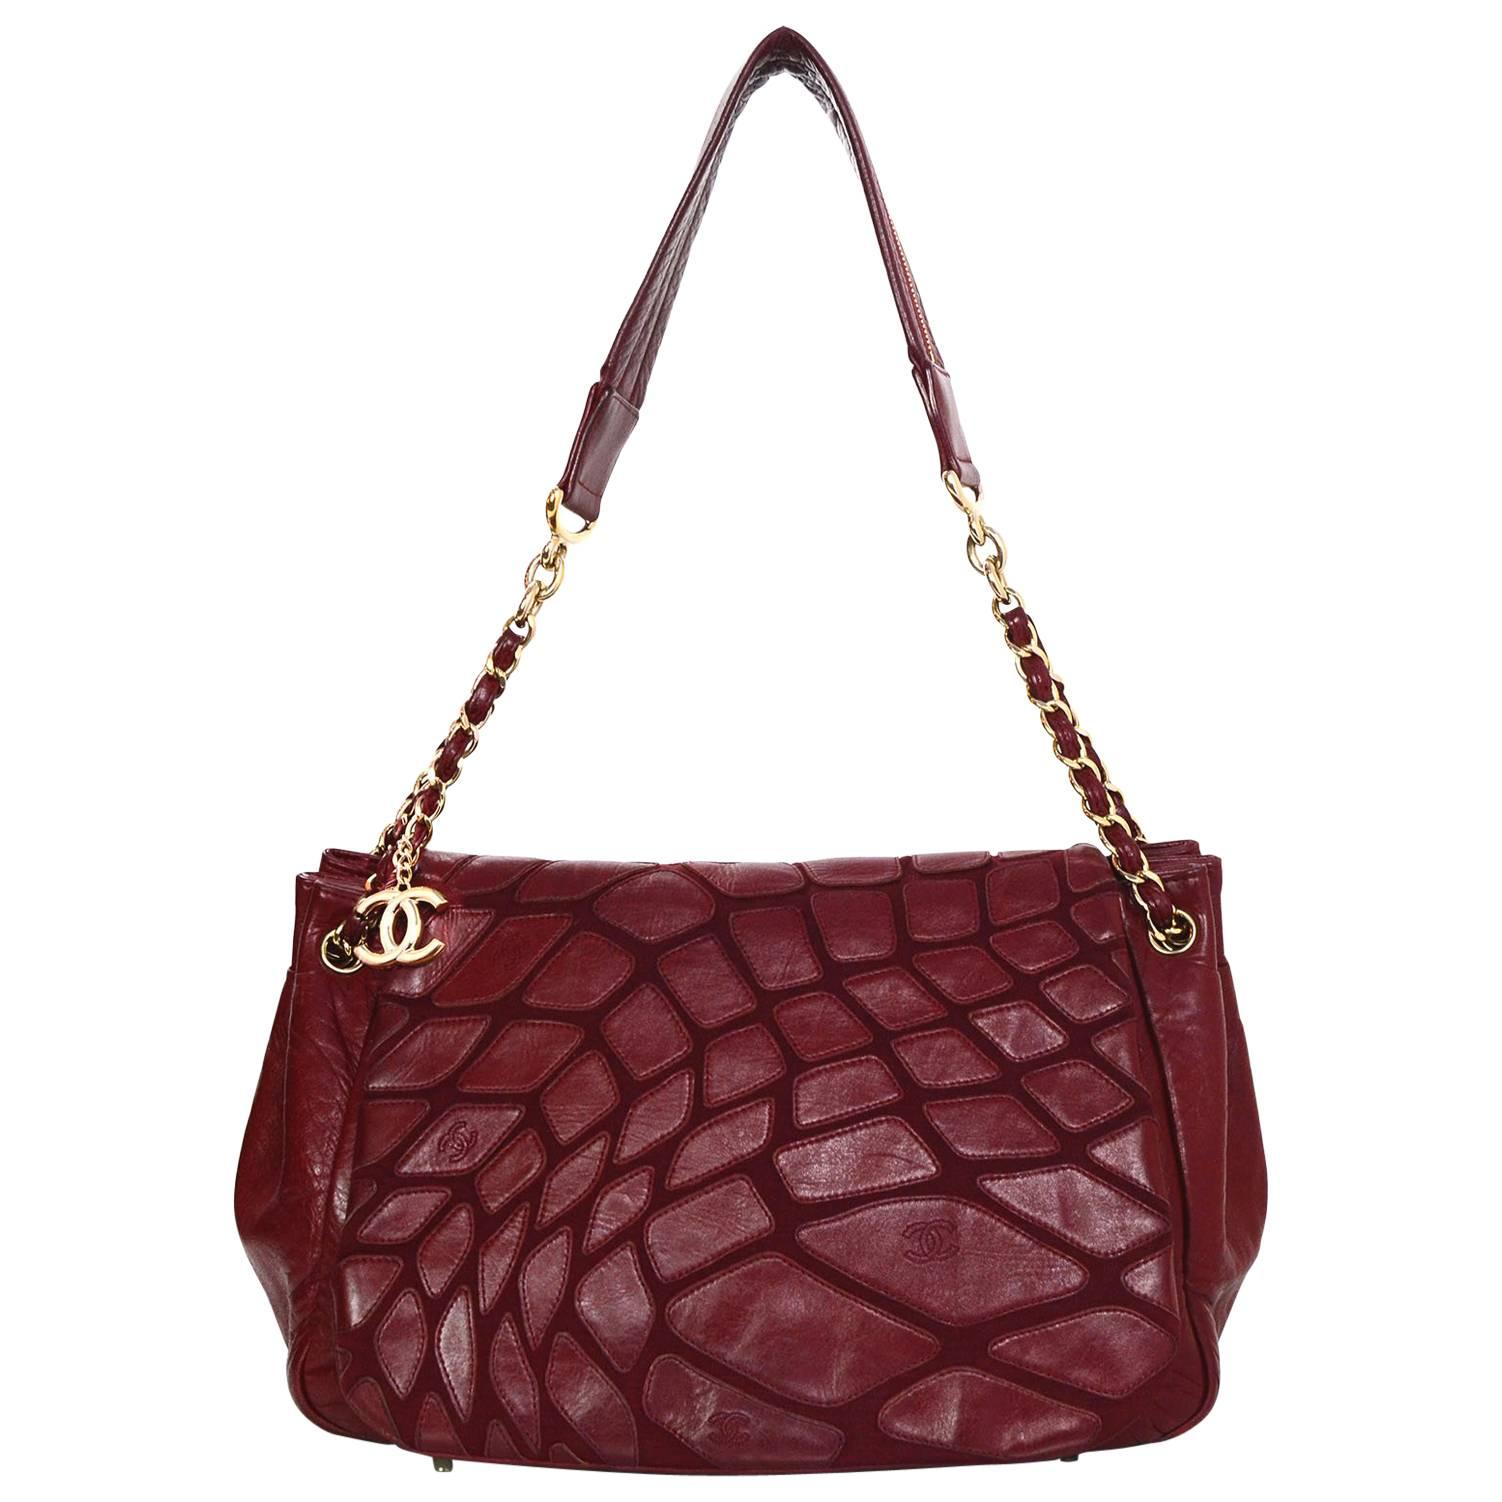 Chanel Red Leather Scales Accordion Flap Bag rt. $2, 800